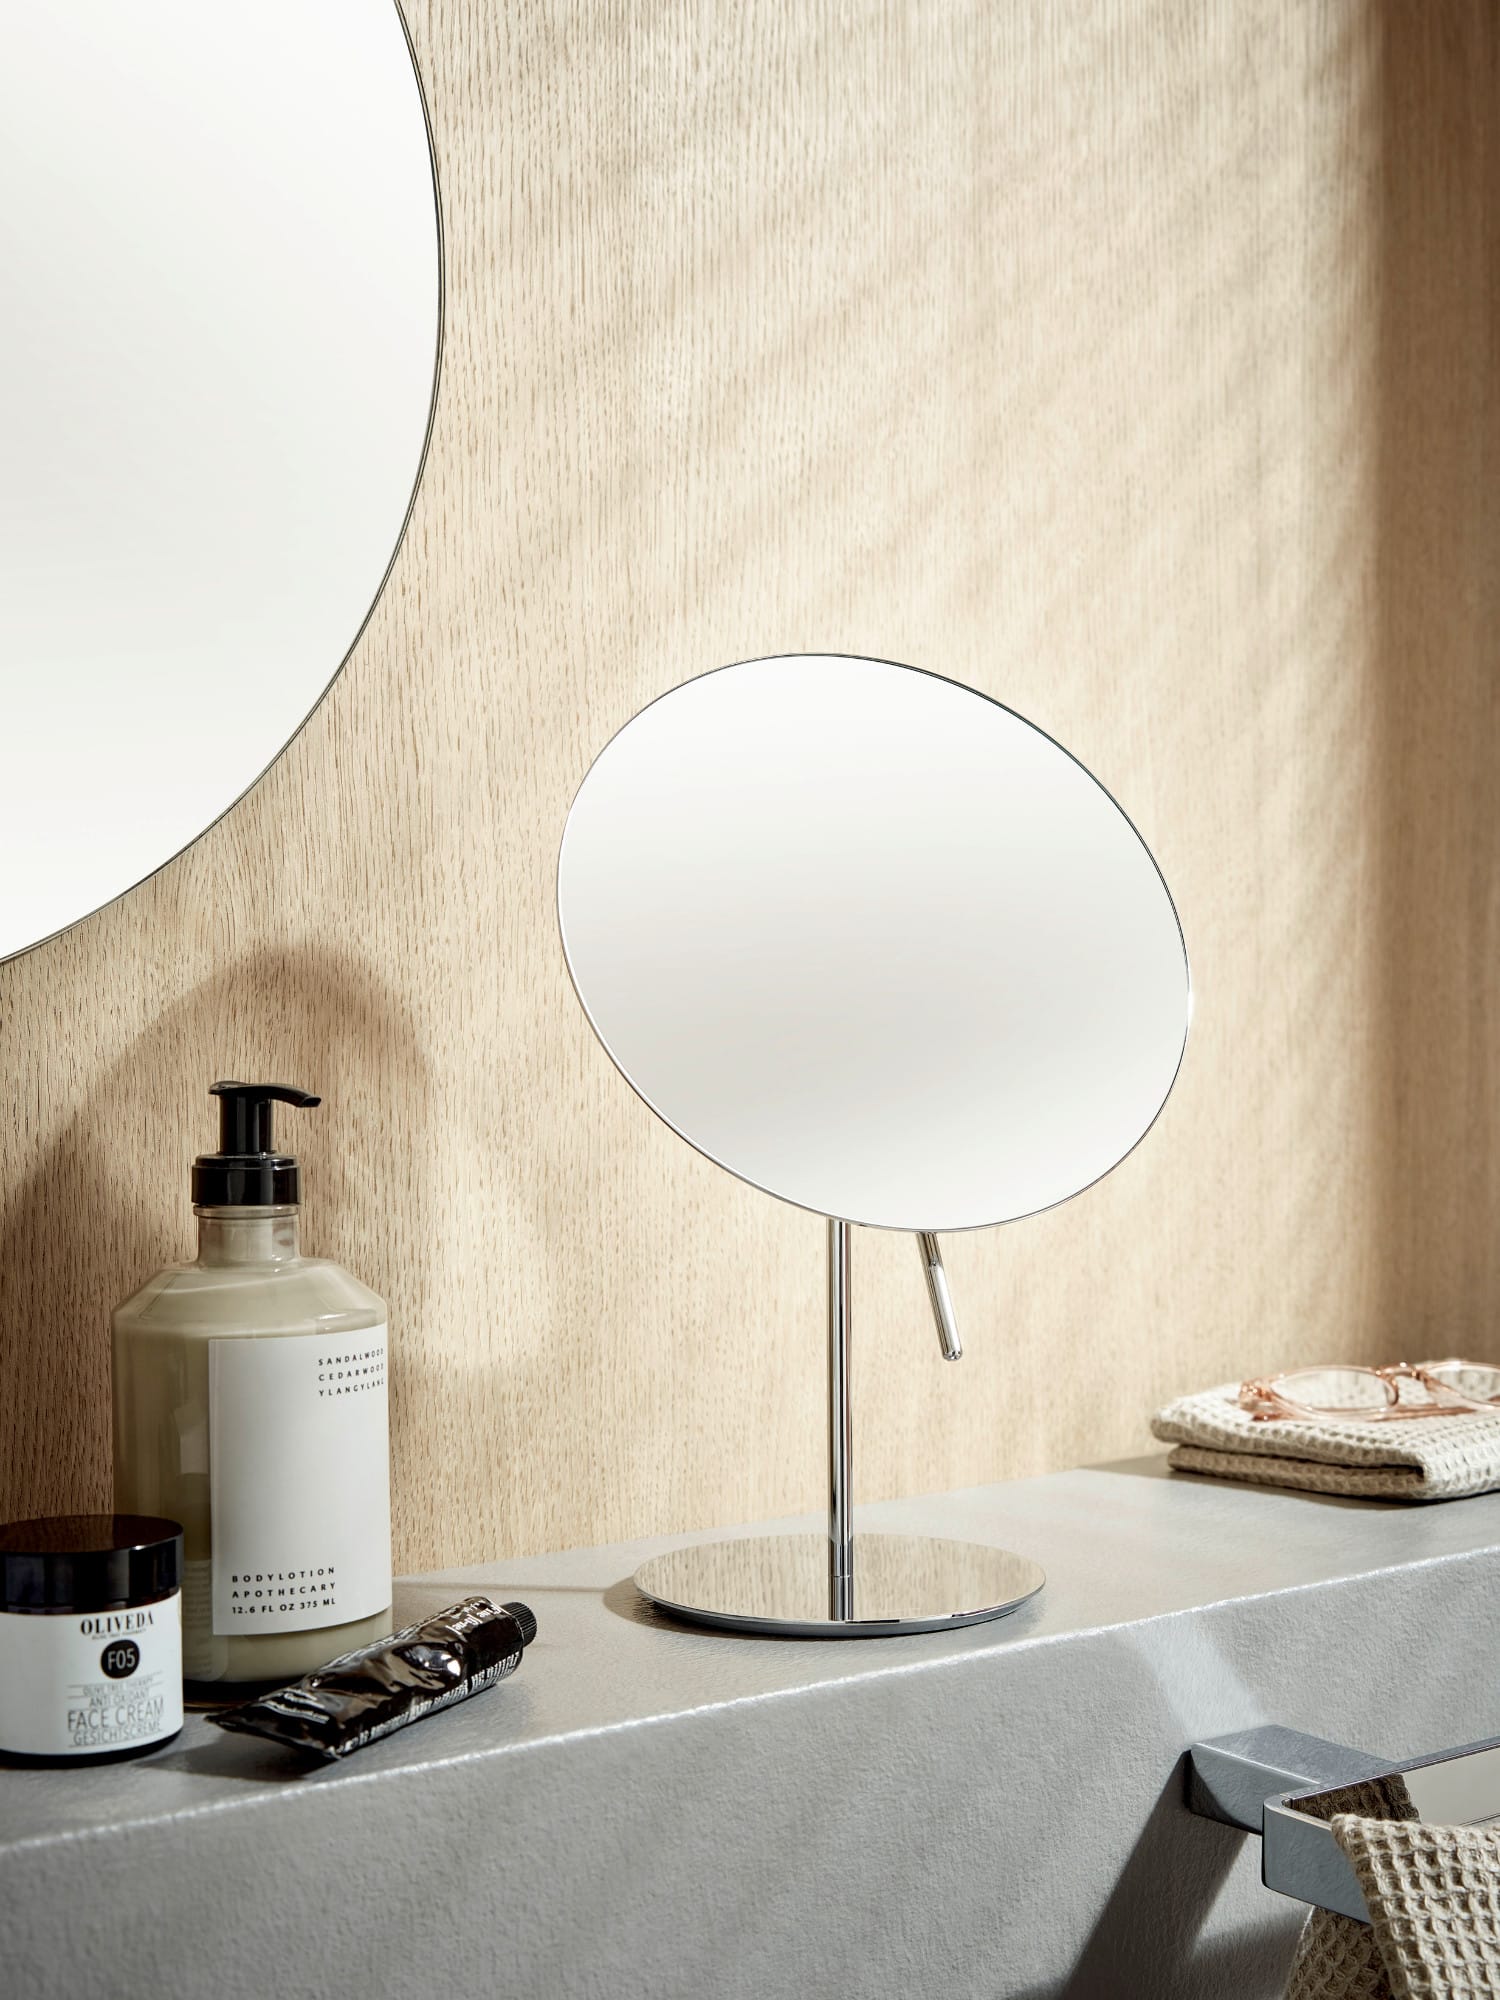 emco pure stick-on mirror, 3-times, rond, Ø 153 mm - EMCO (EN)